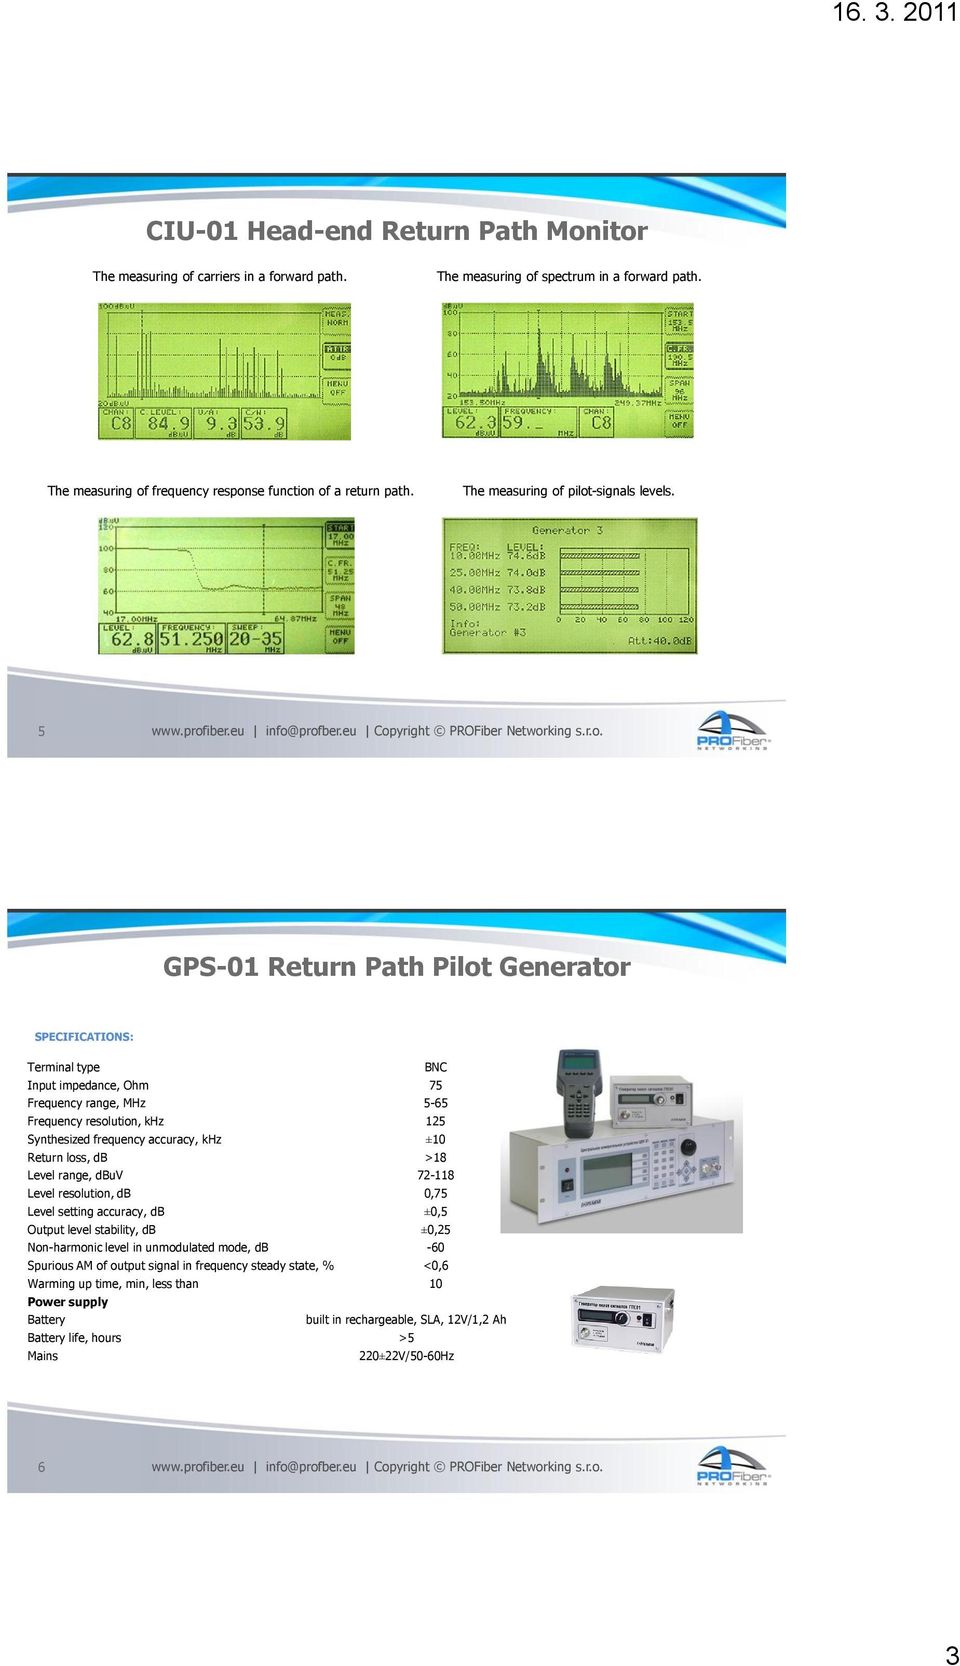 5 GPS-01 Return Path Pilot Generator Terminal type BNC Input impedance, Ohm 75 Frequency range, MHz 5-65 Frequency resolution, khz 125 Synthesized frequency accuracy, khz ±10 Return loss, db >18